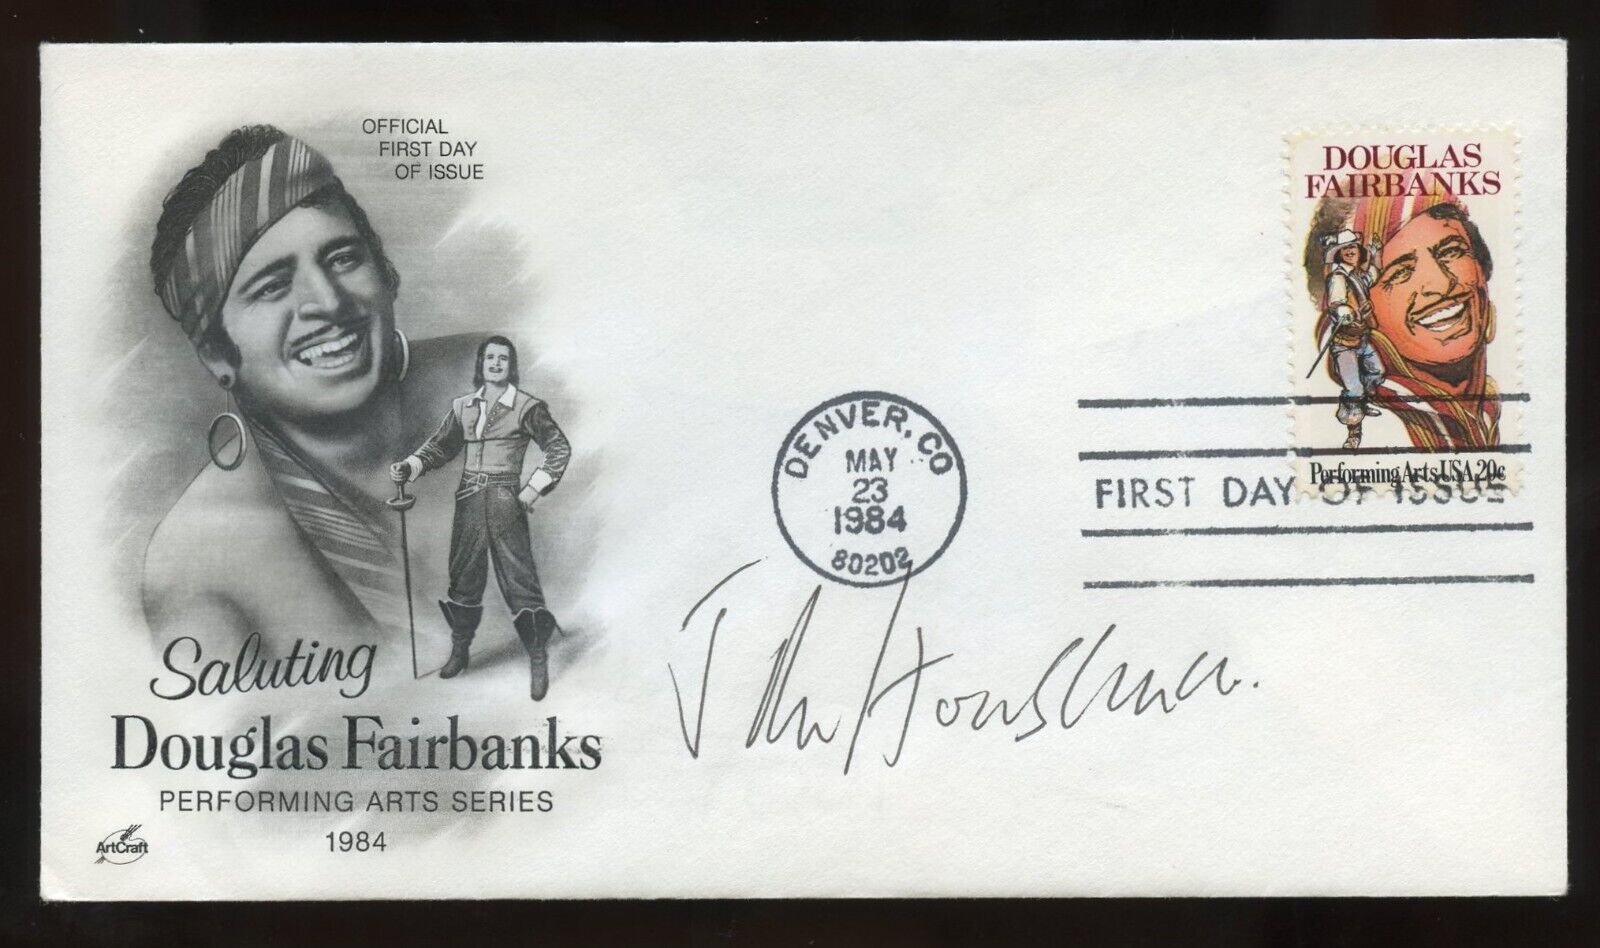 John Housman d1988 signed auto Actor Producer The Federal Theater Project FDC